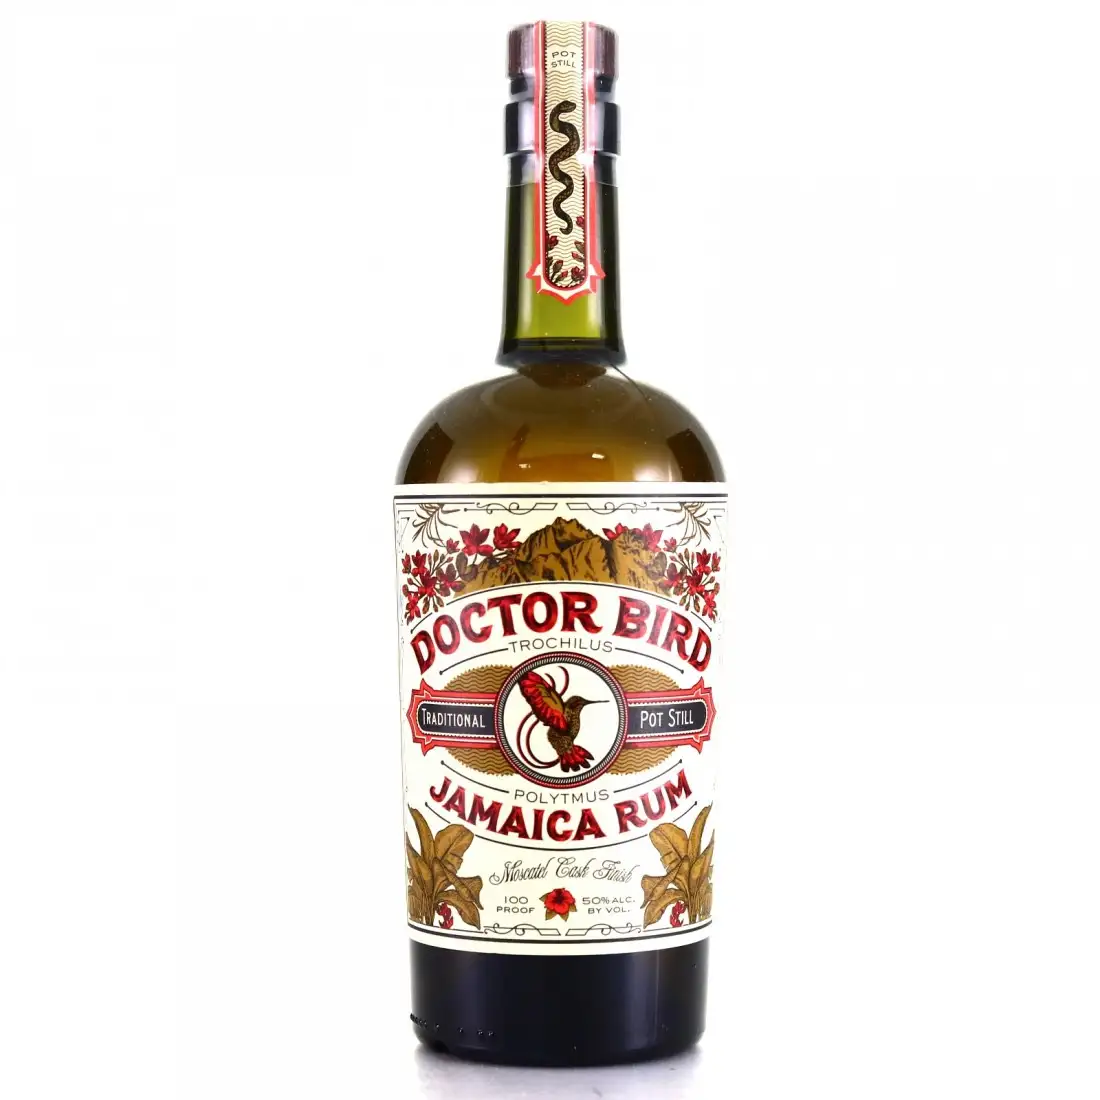 Image of the front of the bottle of the rum Doctor Bird Jamaica Rum